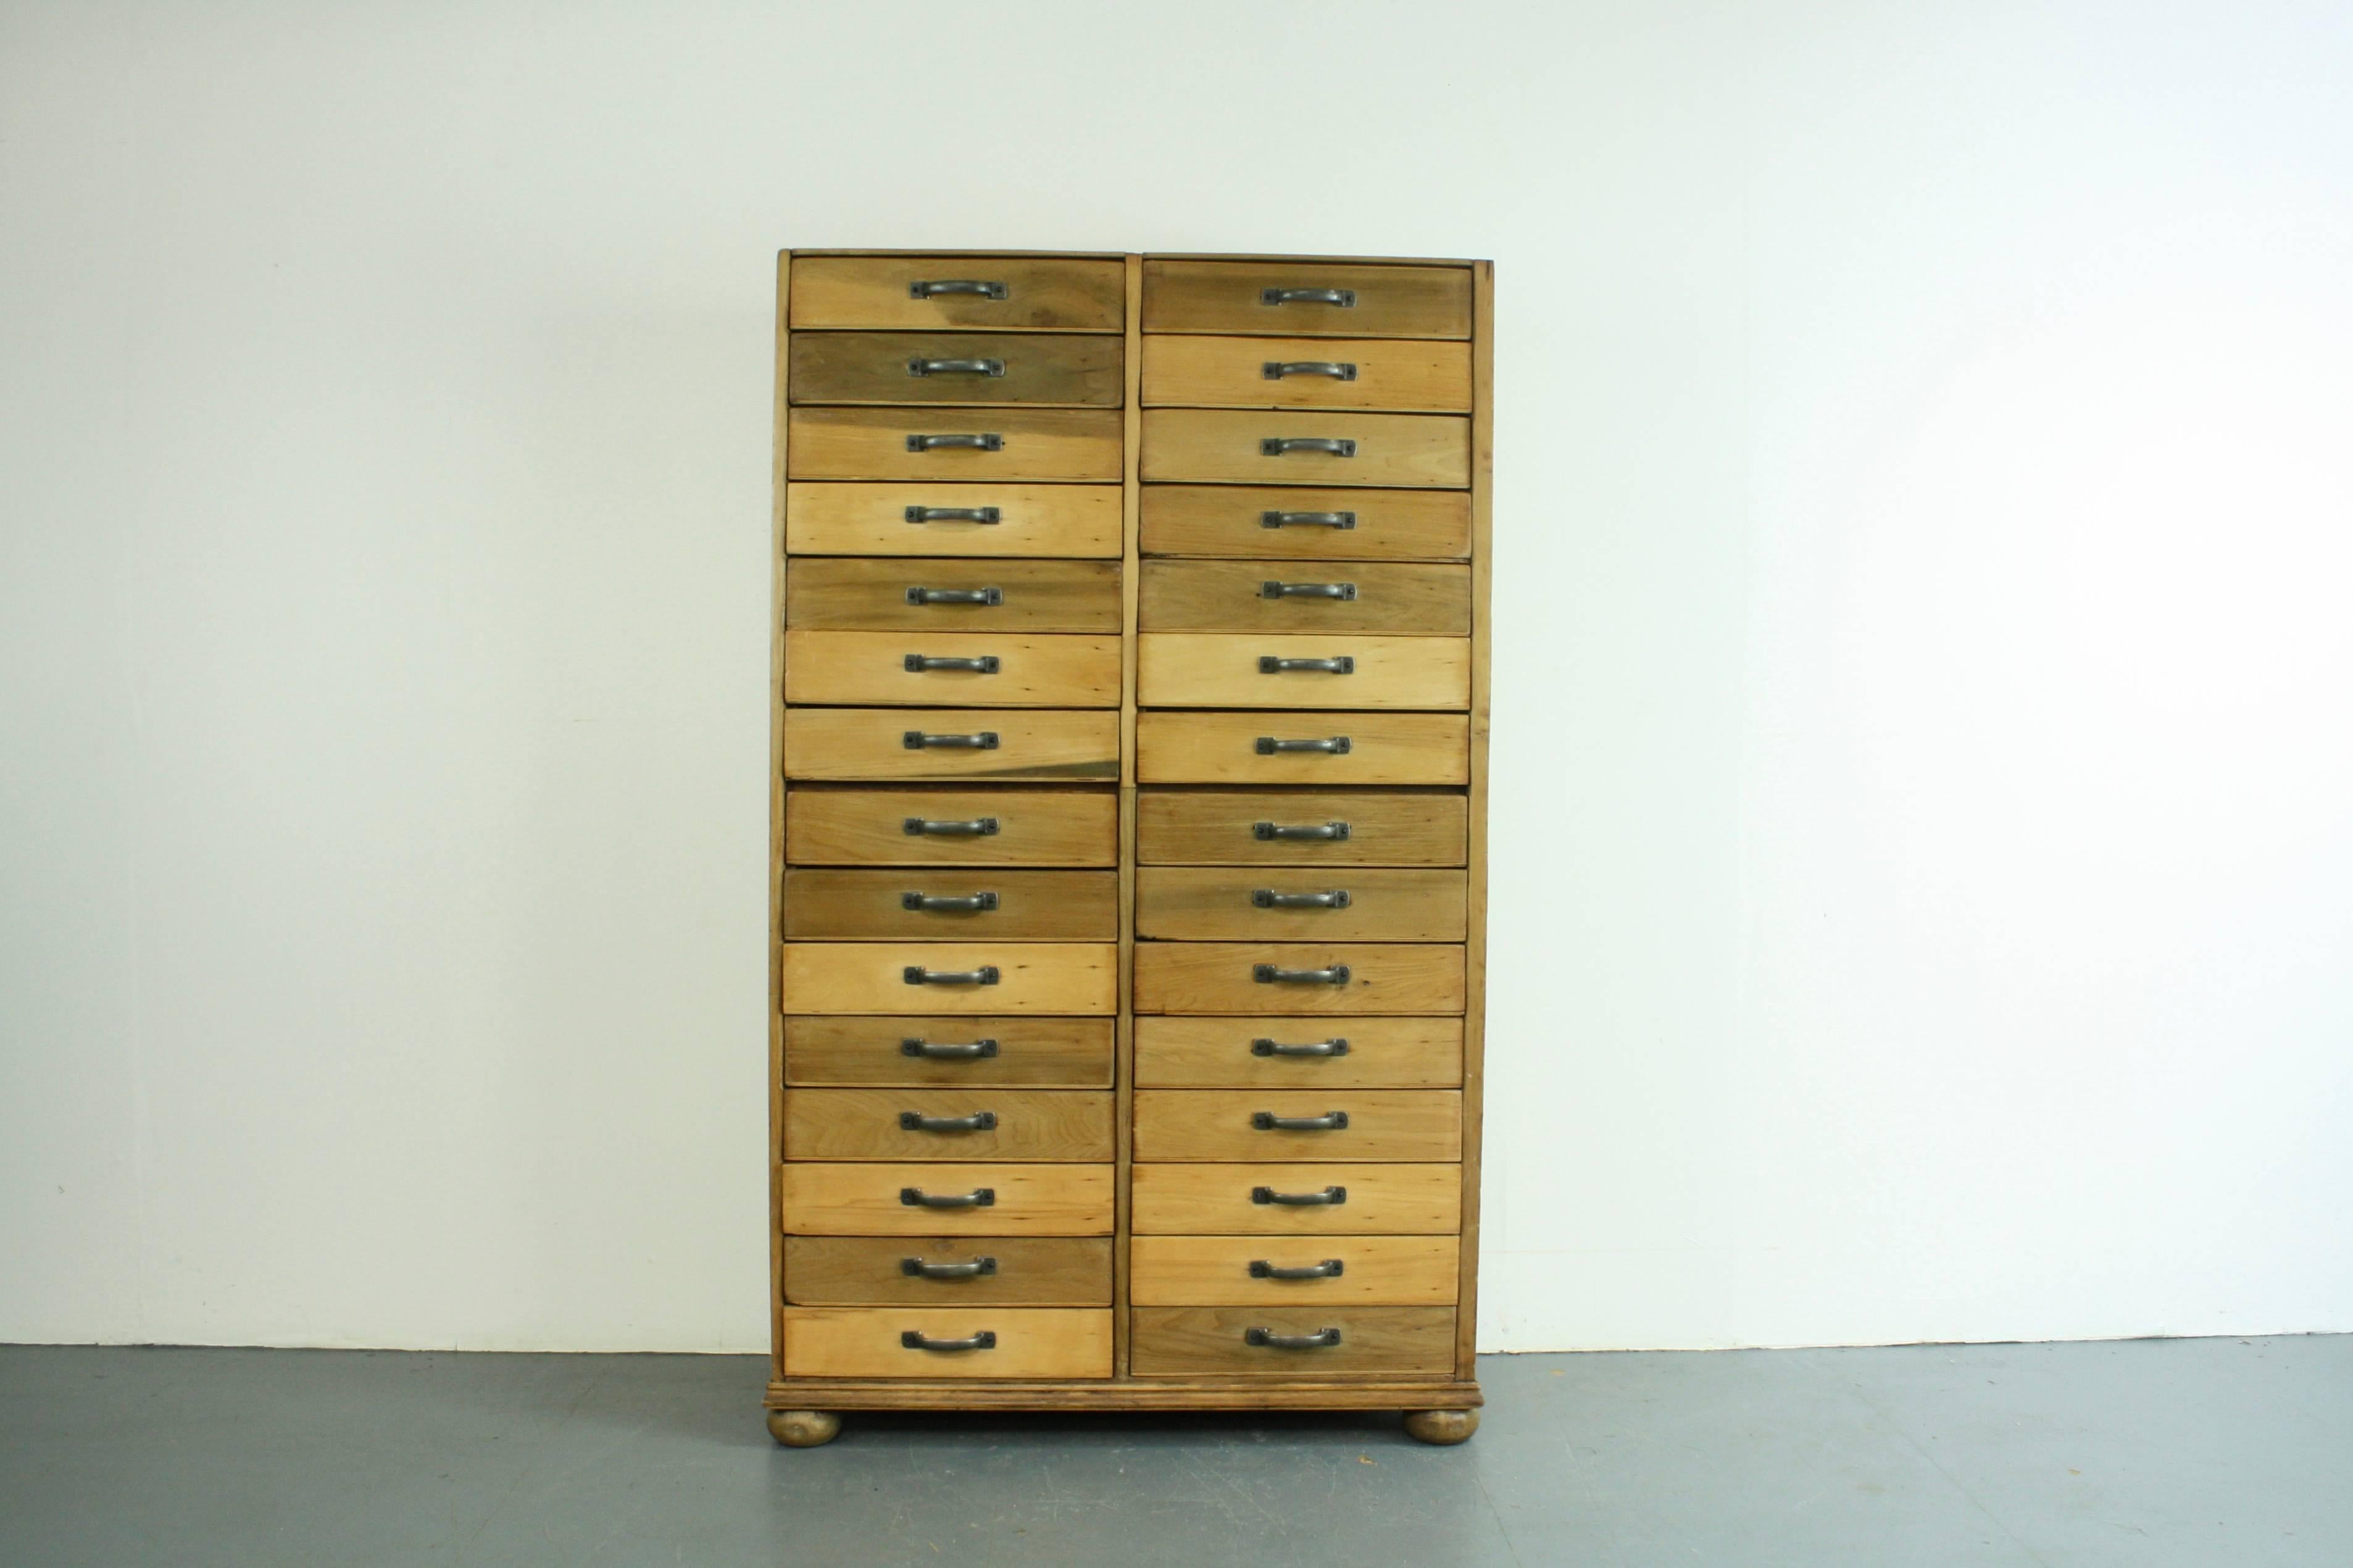 Solid 1920s pine two column filing drawers with D handles. Nicely made piece with dovetailed joints. Lovely patina.

In good vintage condition. Some scuffs here and there, as to be expected. 

Please bear in mind this has come from a working